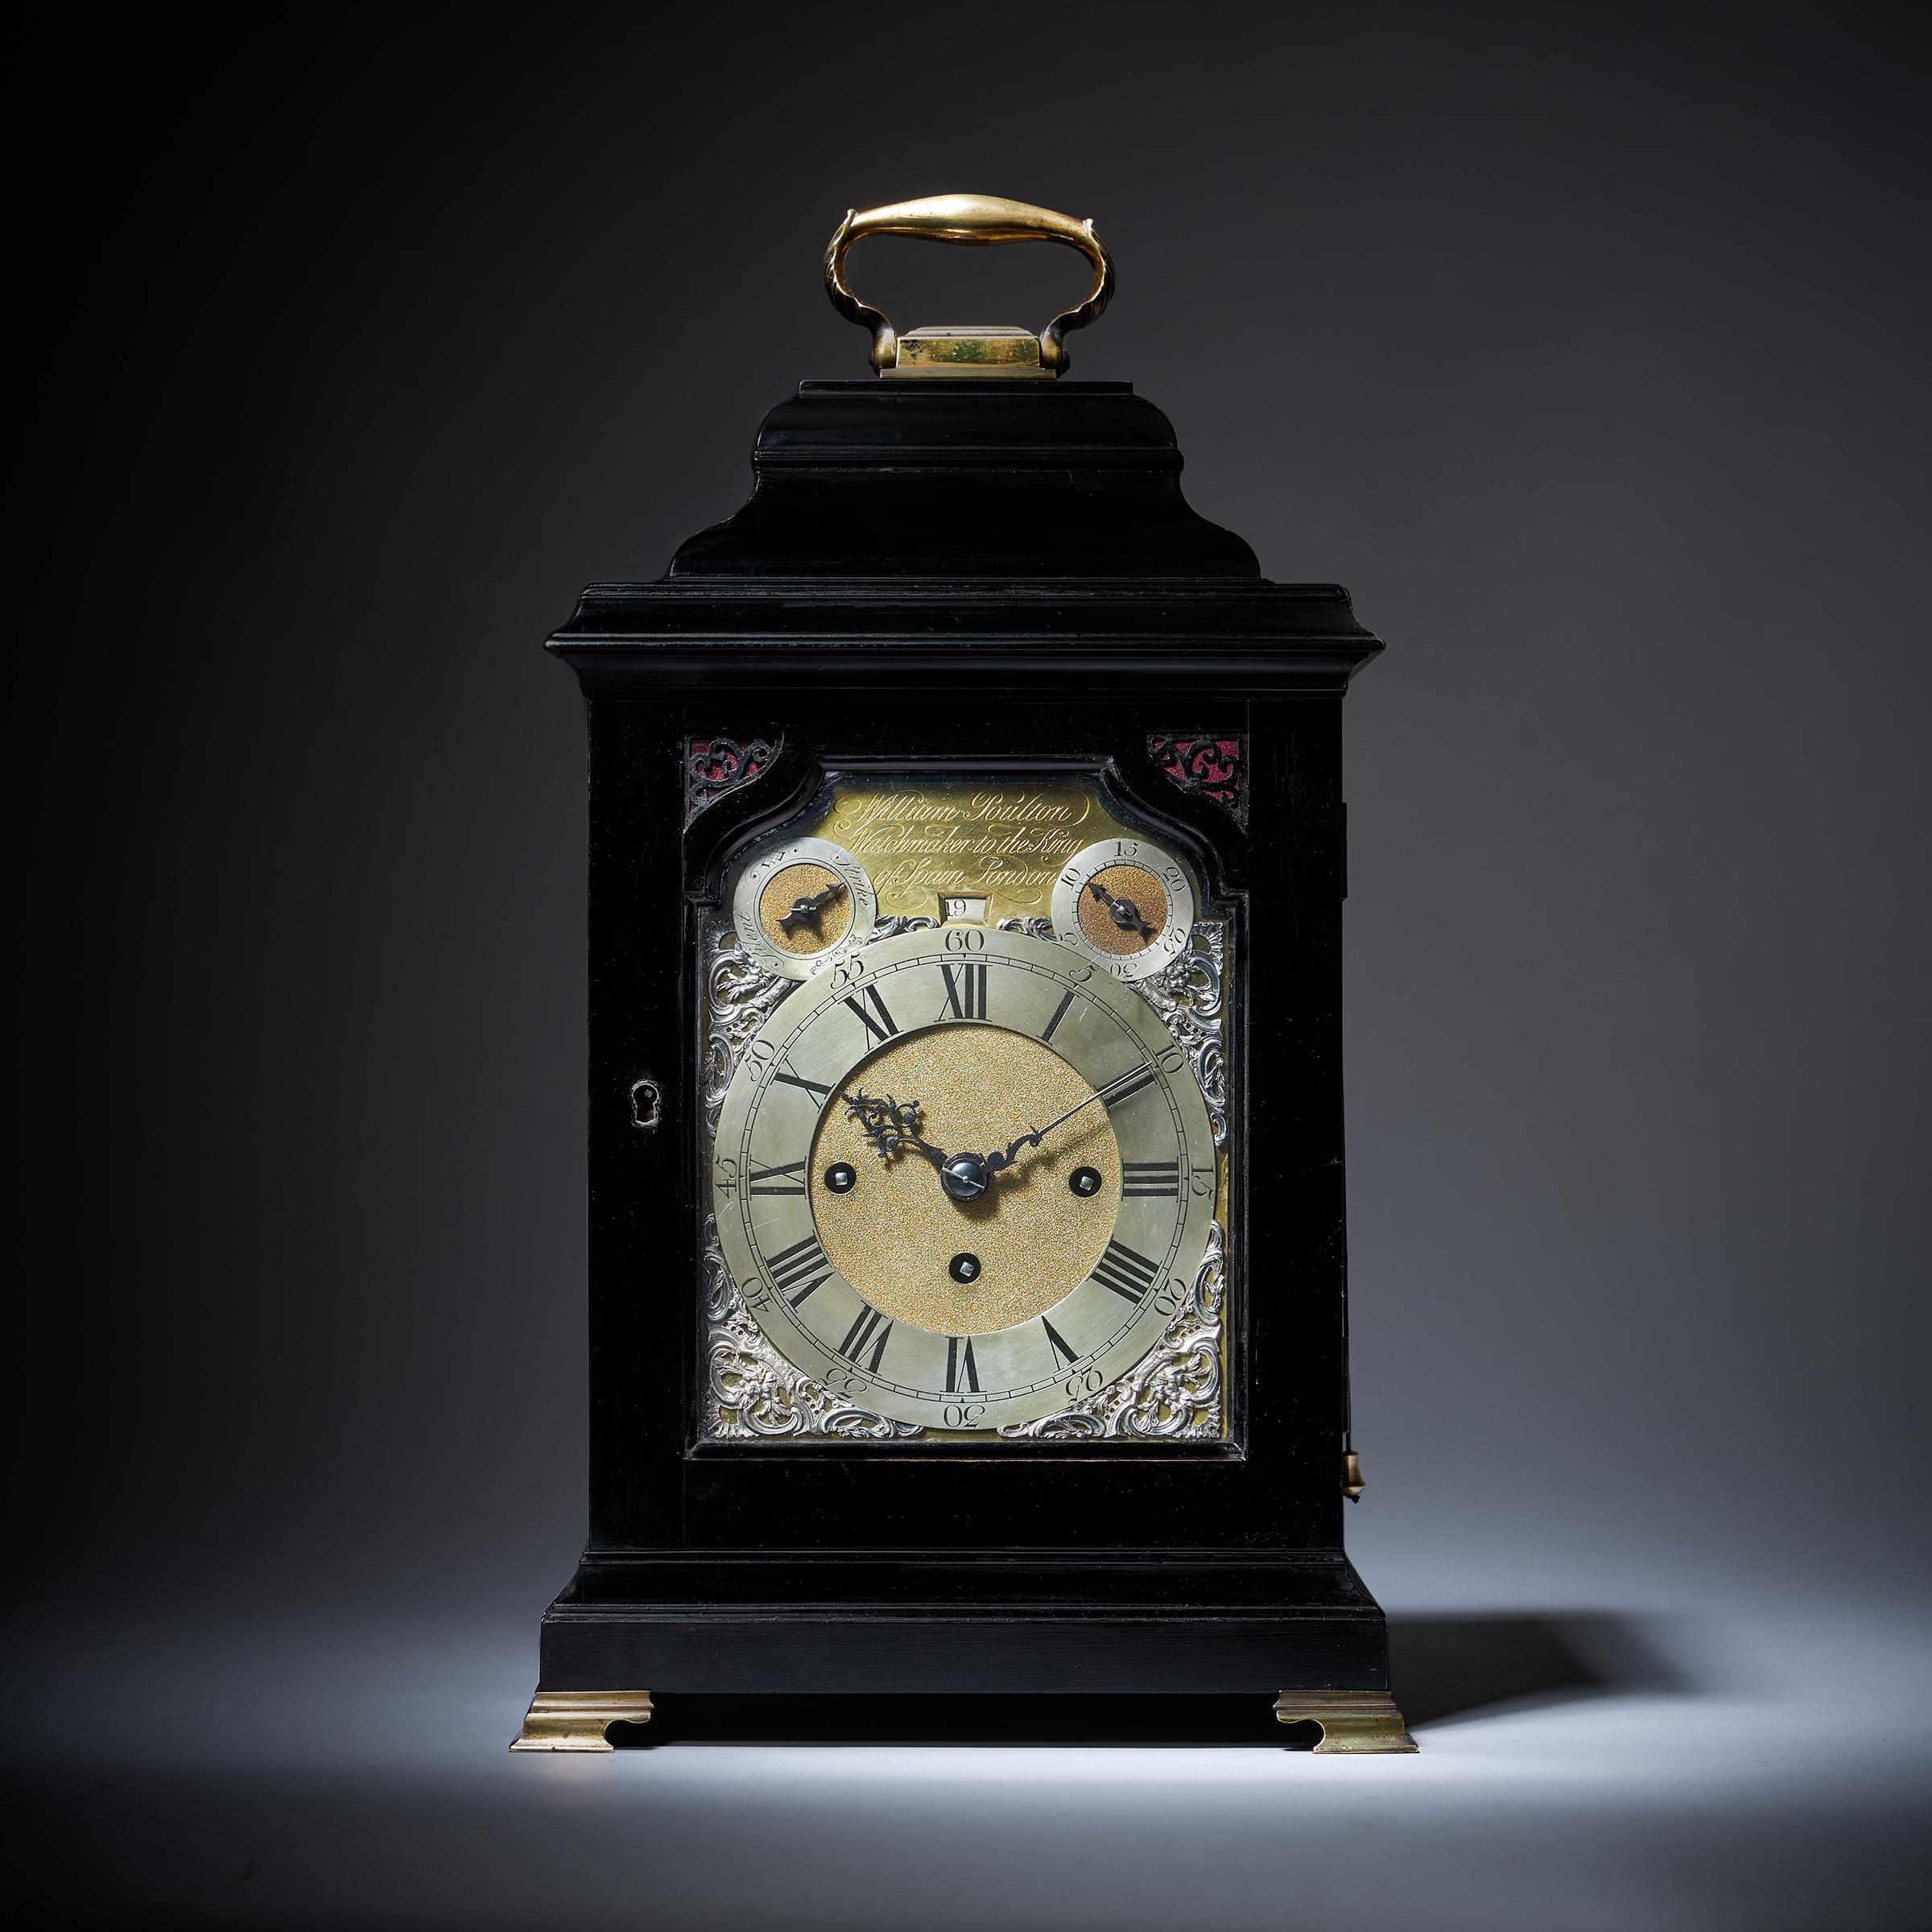 A Rare 18th-Century Georg II Grande Sonnerie Striking Spring Table Clock by William Poulton, London, C.1750

Watchmaker to the King of Spain. 

A small and extremely attractive English eighteenth-century grande sonnerie striking spring clock